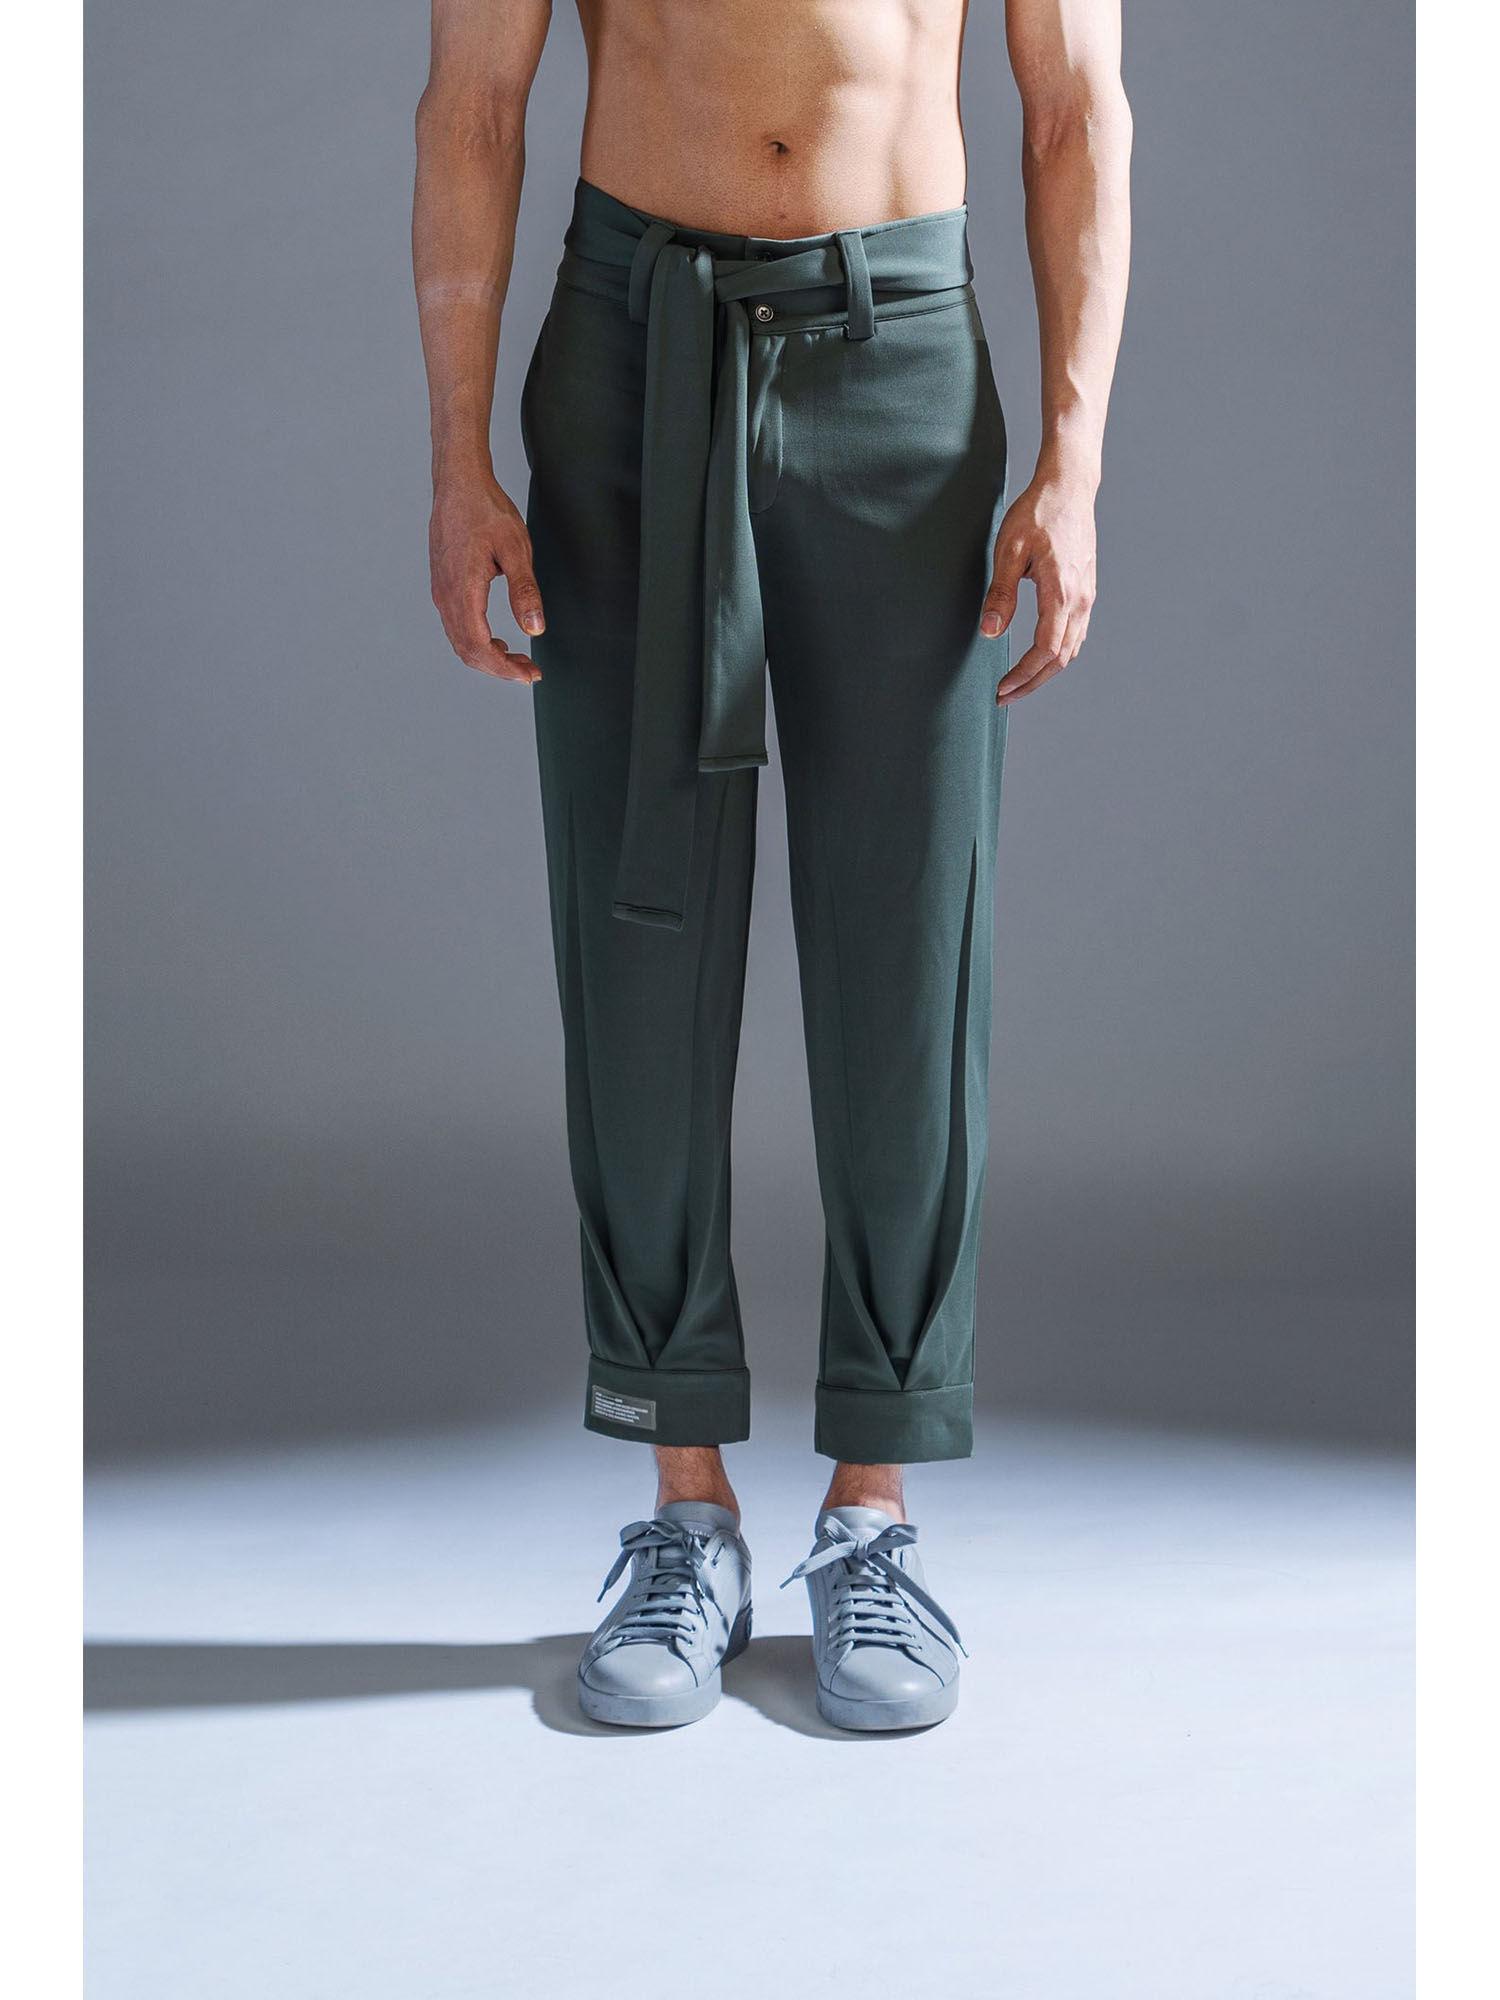 sage green polyester trouser with belt (set of 2)